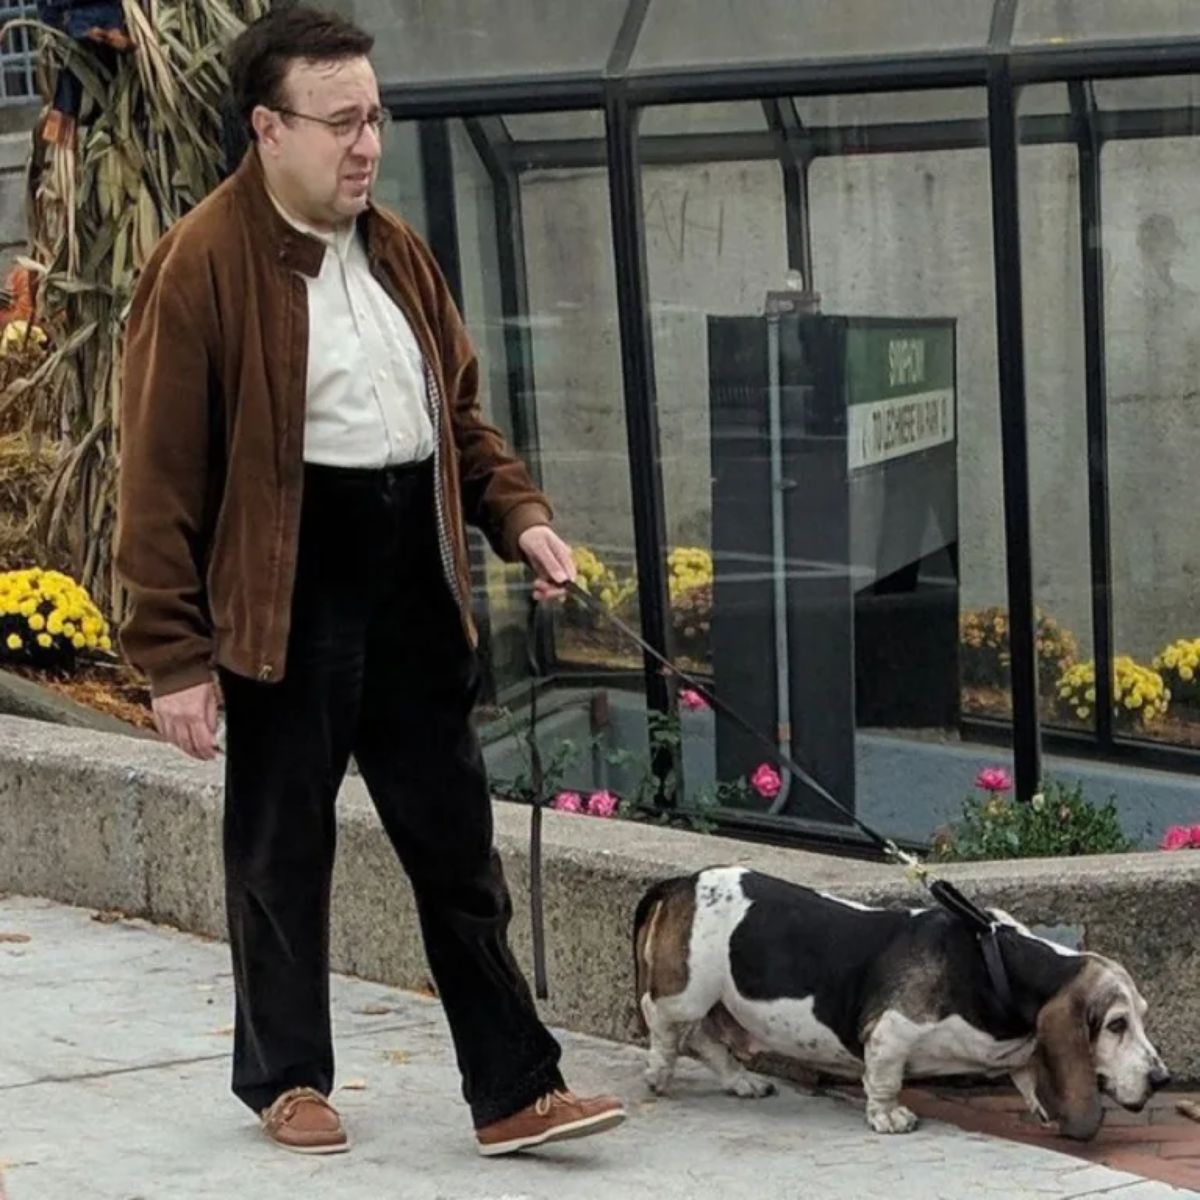 black white and brown basset hound getting walked by a man with a long face